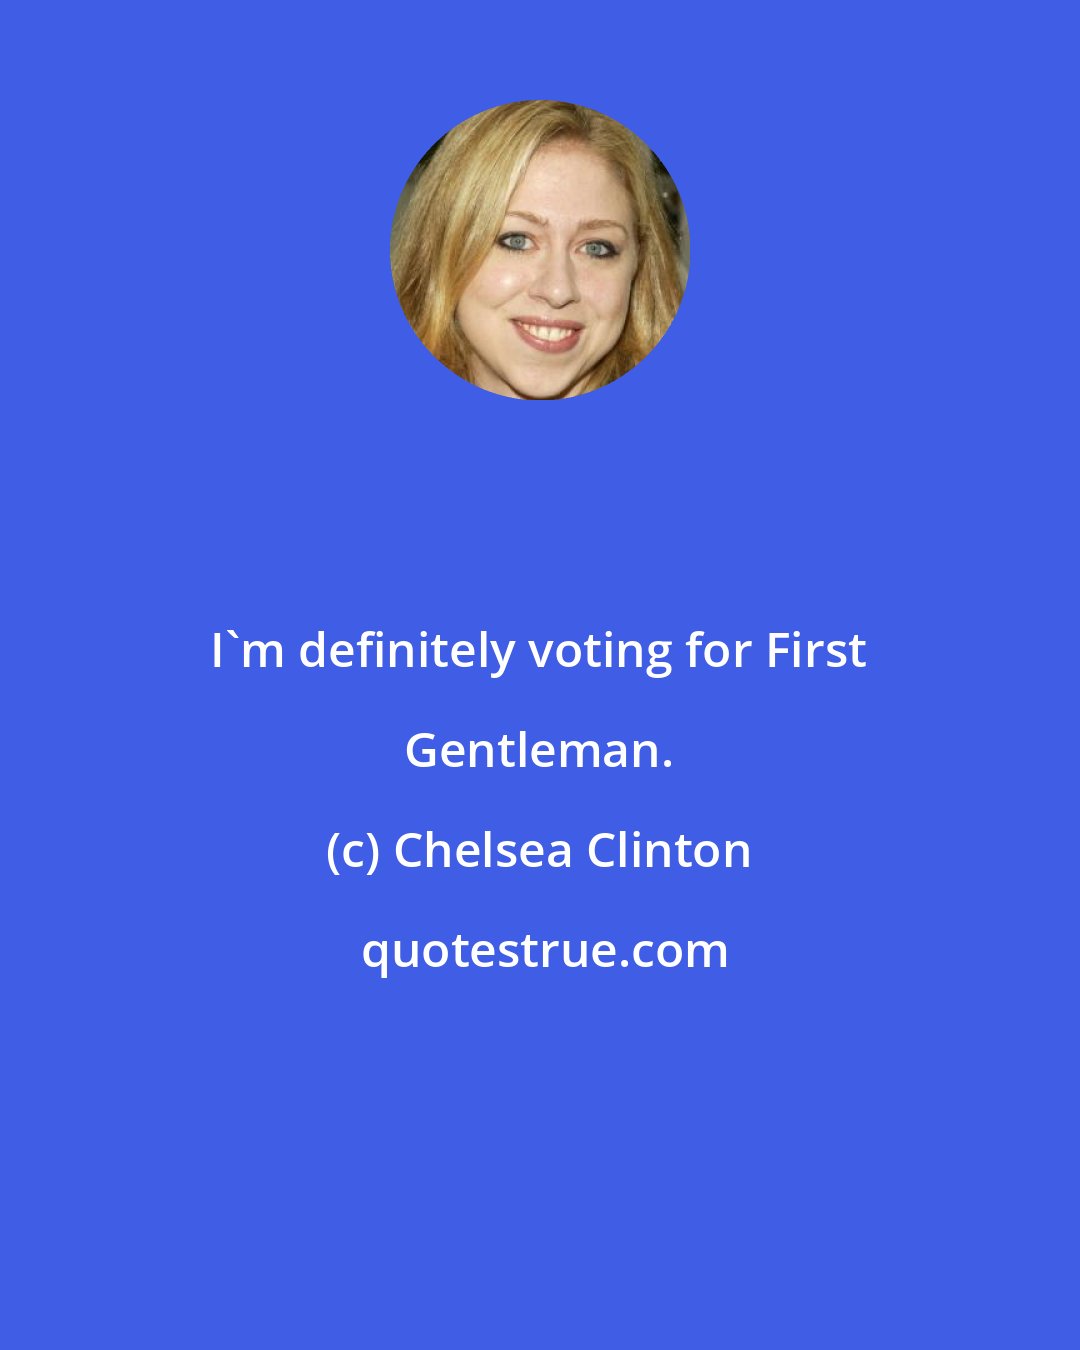 Chelsea Clinton: I'm definitely voting for First Gentleman.